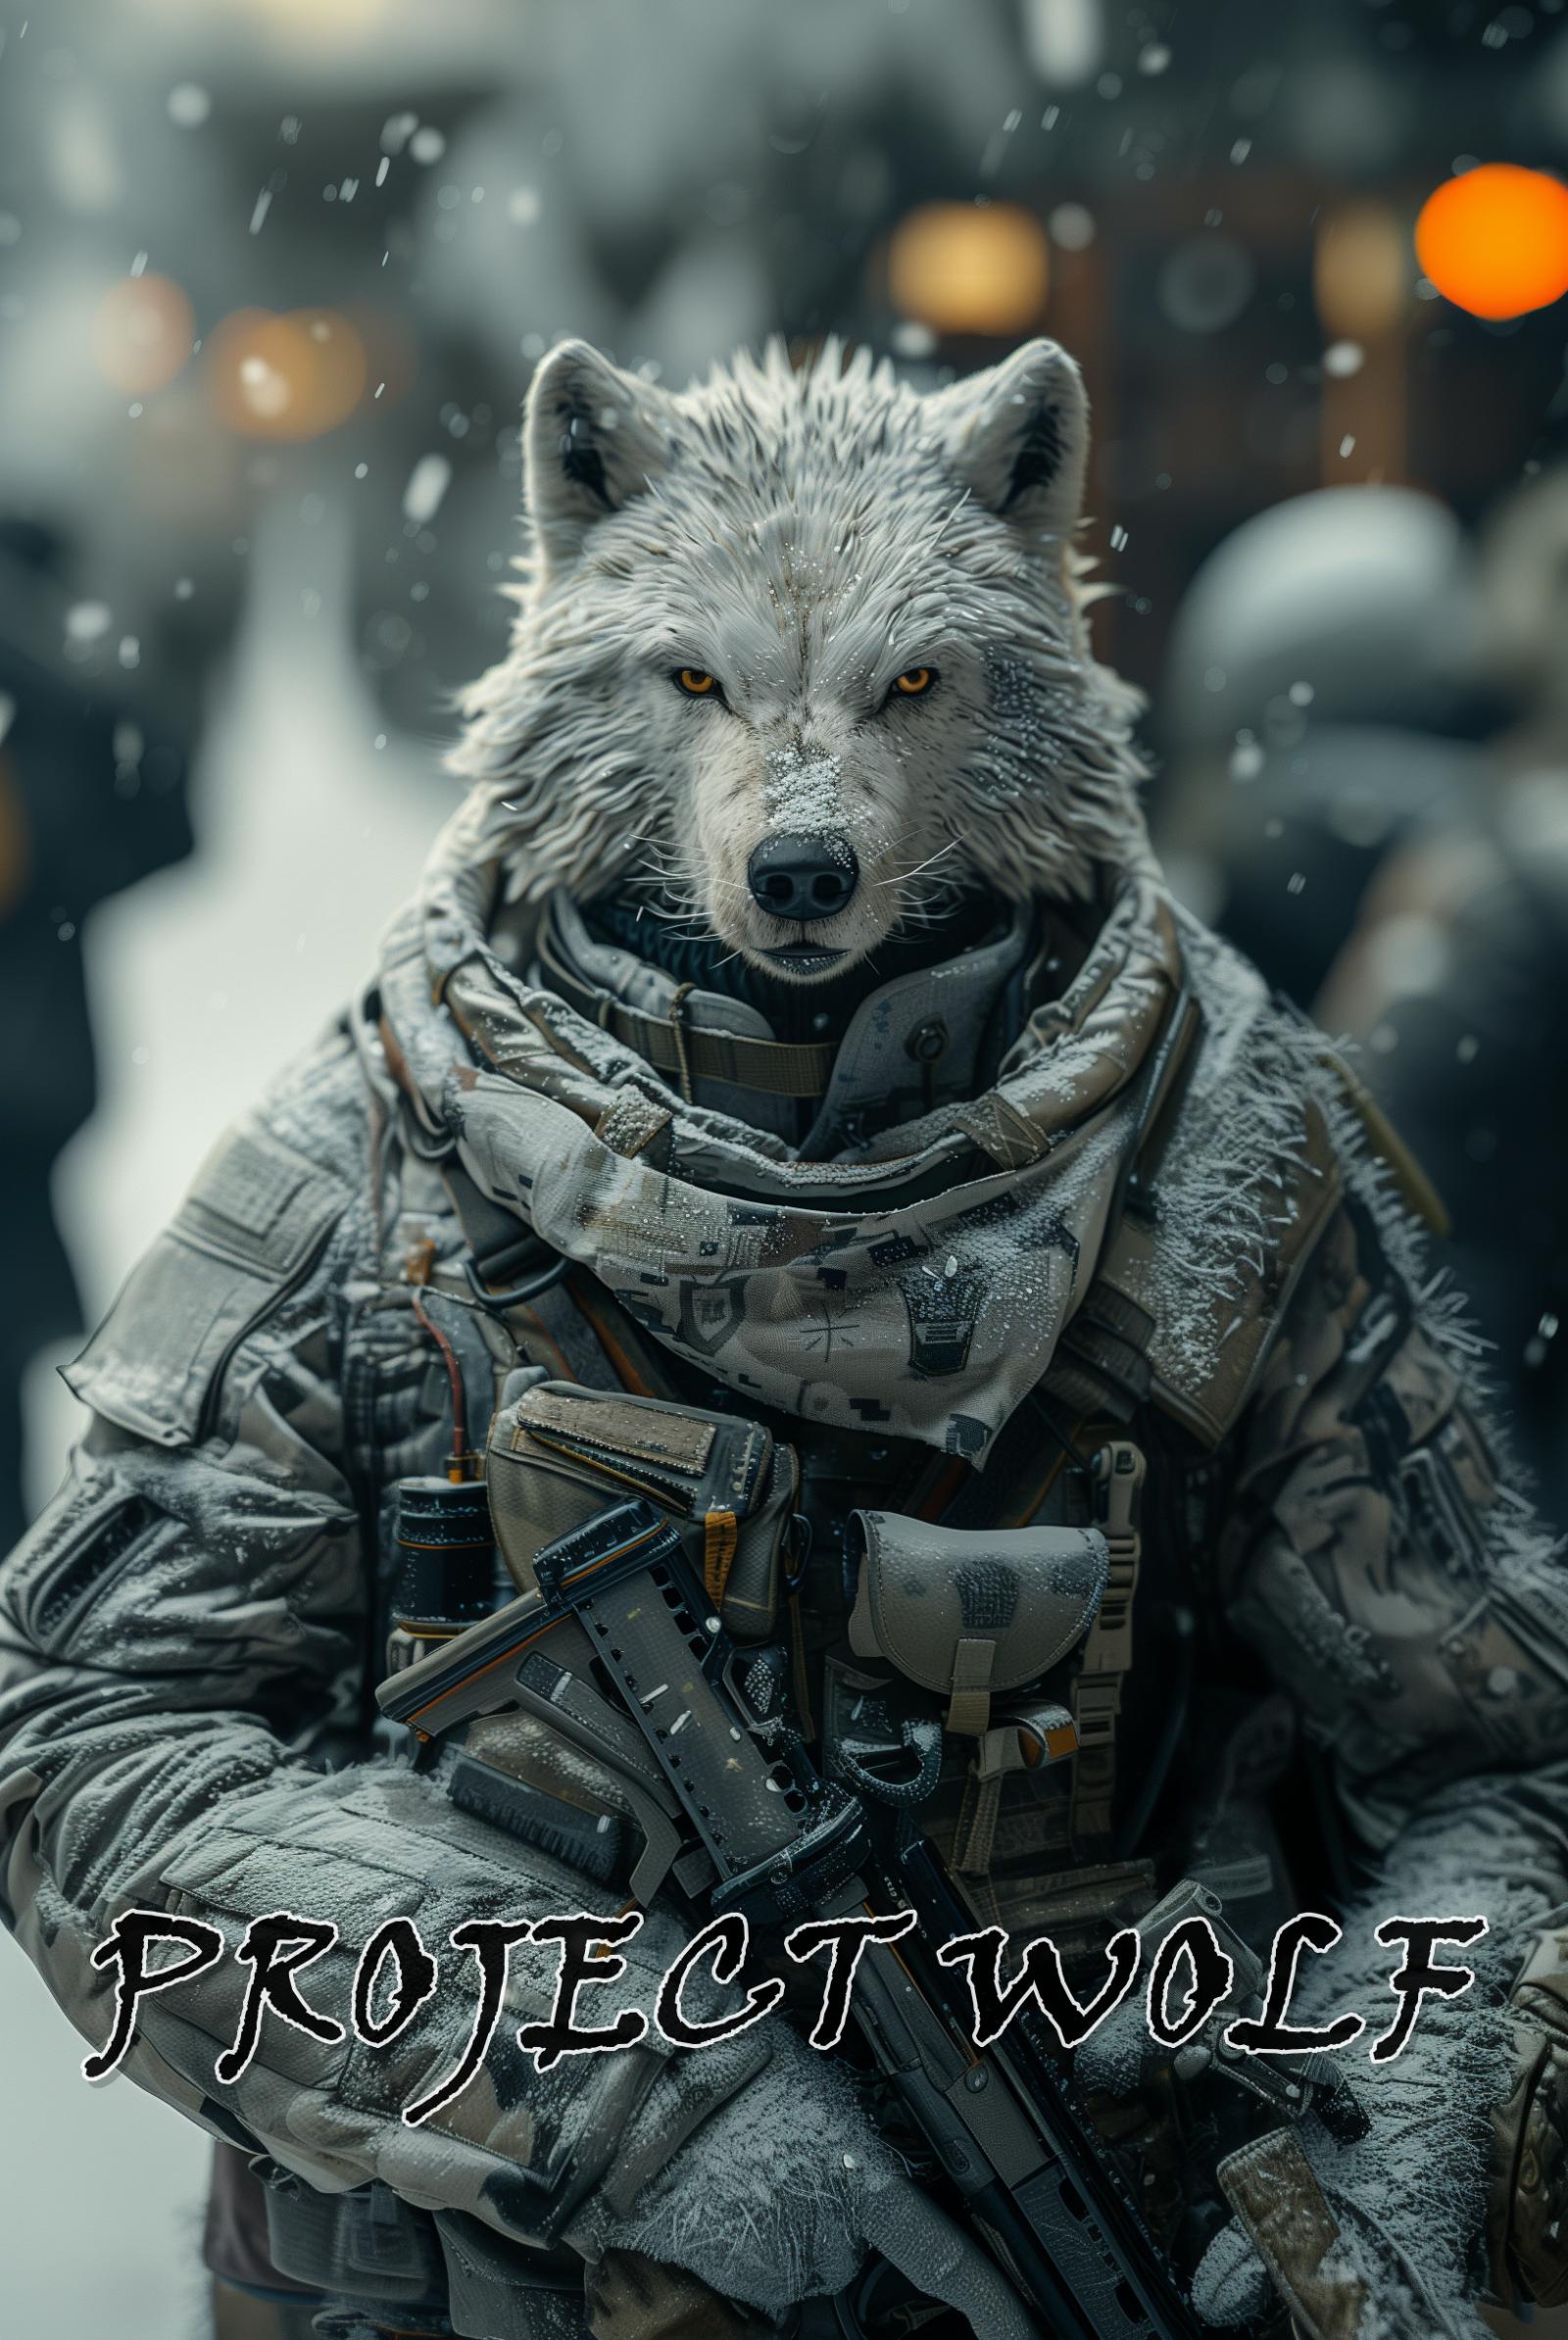 storm2day_Courageous_polar_wolf_in_full_winter_military_uniform_c49e37fa-9fbe-4444-88ce-a9558d741a52.png.jpg